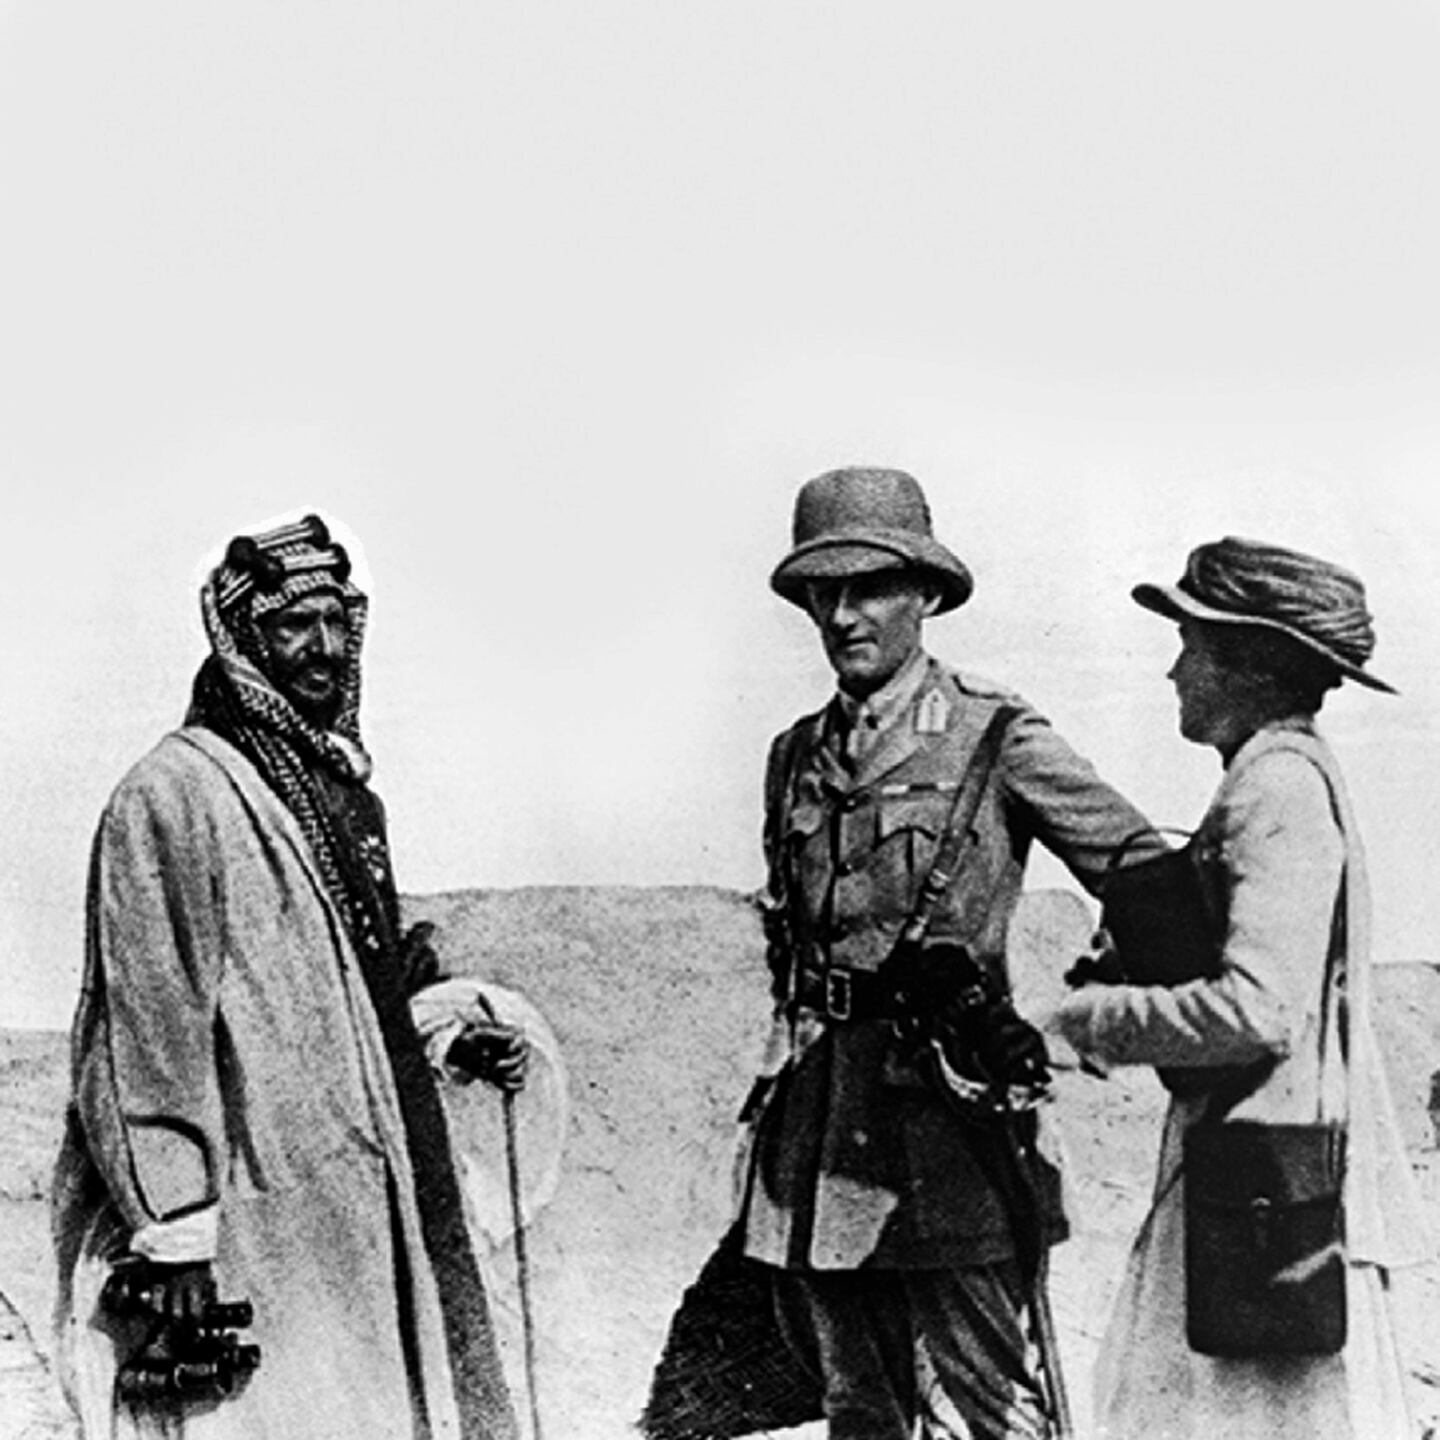 Gertrude Bell, one of the most influential western women in Arabia. Photo: Royal Geographic Society